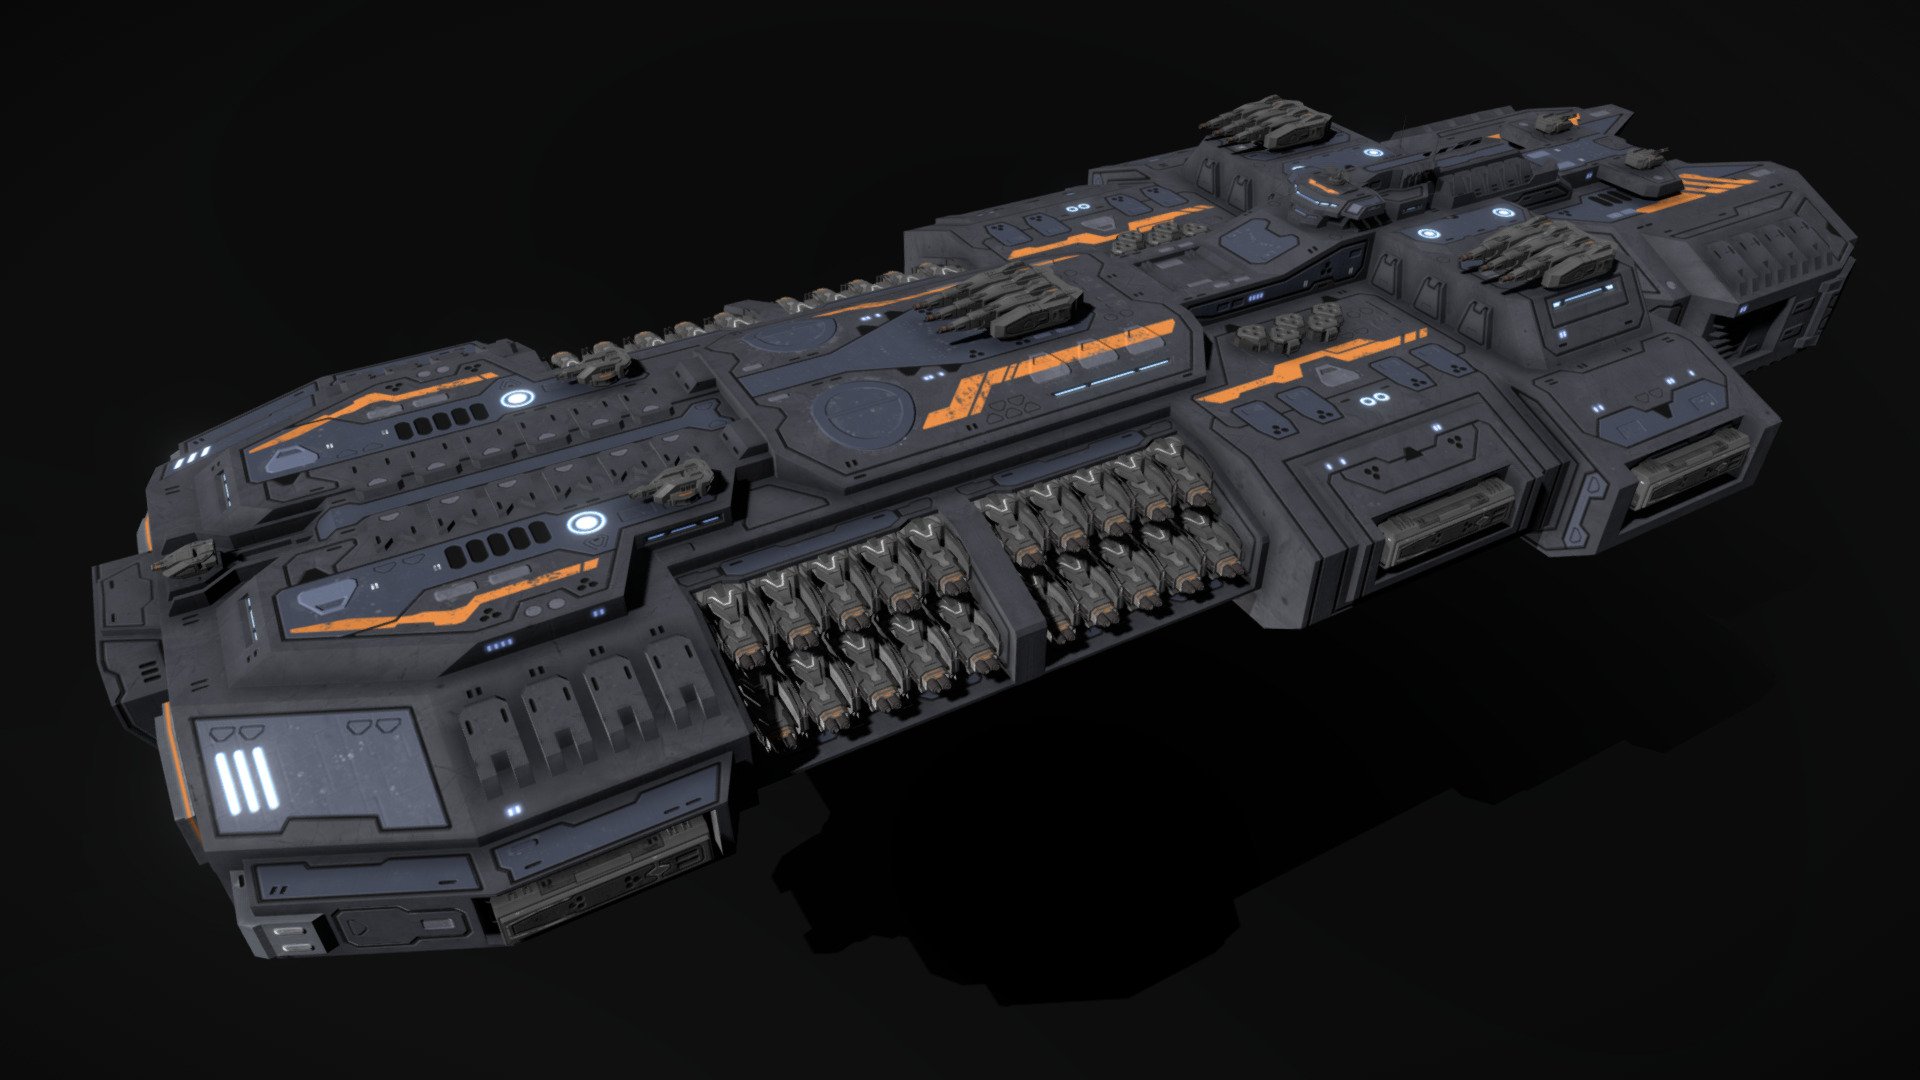 This is a model of a low-poly and game-ready scifi spaceship. 

The weapons are separate meshes and can be animated with a keyframe animation tool. The weapon loadout can be changed as well.

The model comes with several differently colored texture sets. The PSD file with intact layers is included too.

Please note: The textures in the Sketchfab viewer have a reduced resolution to improve Sketchfab loading speed.

If you have bought this model please make sure to download the “additional files”. Those include FBX and OBJ meshes, full resolution textures and the source PSDs with intact layers. The meshes are separate and can be animated (e.g. firing animations for gun barrels, rotating turrets, etc) 3d model